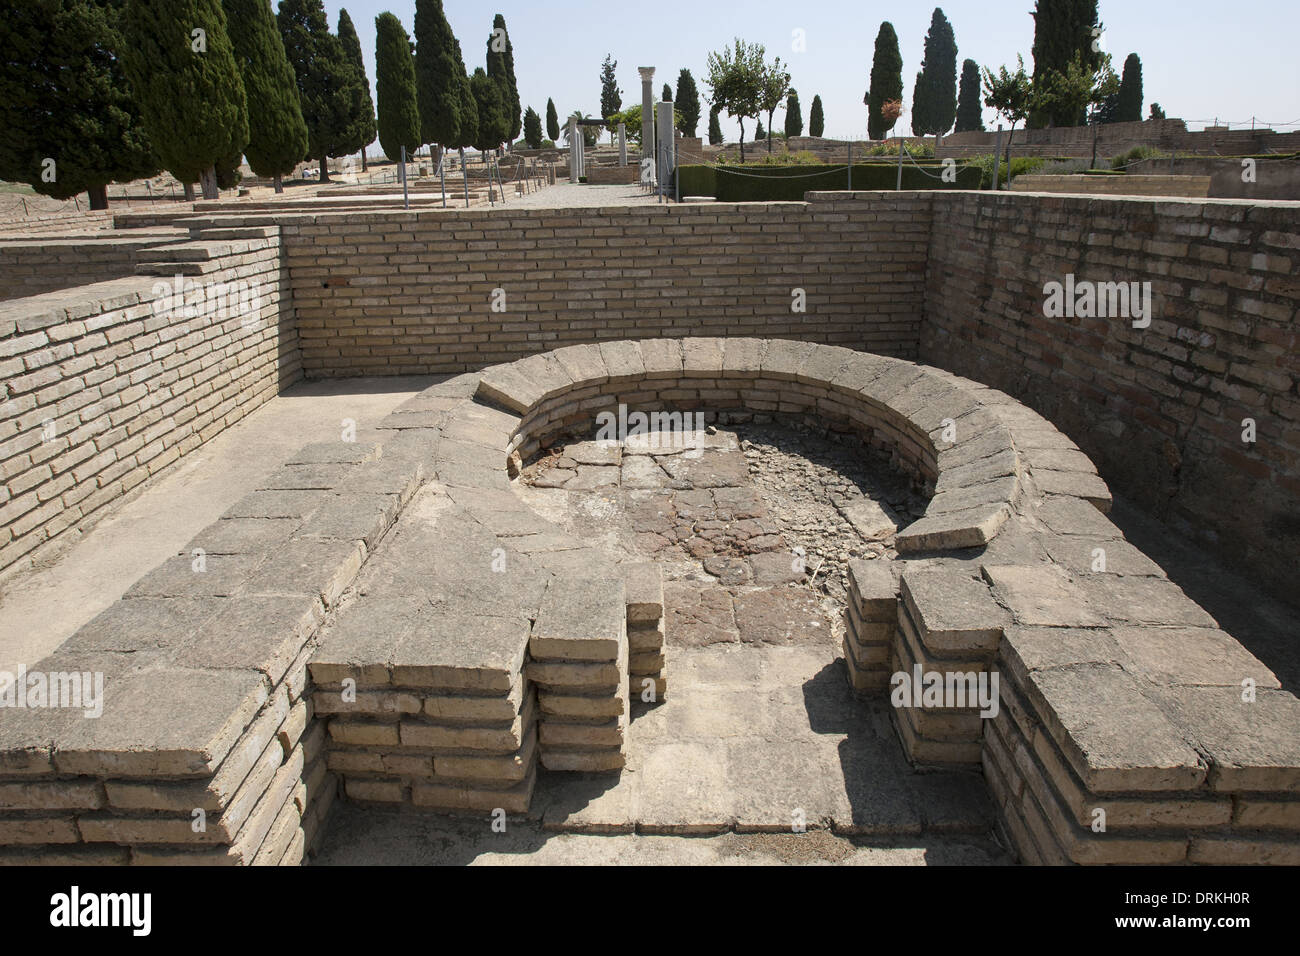 Spain. Italica. Roman city founded c. 206 BC. House of the Birds. Bread oven. Andalusia. Stock Photo